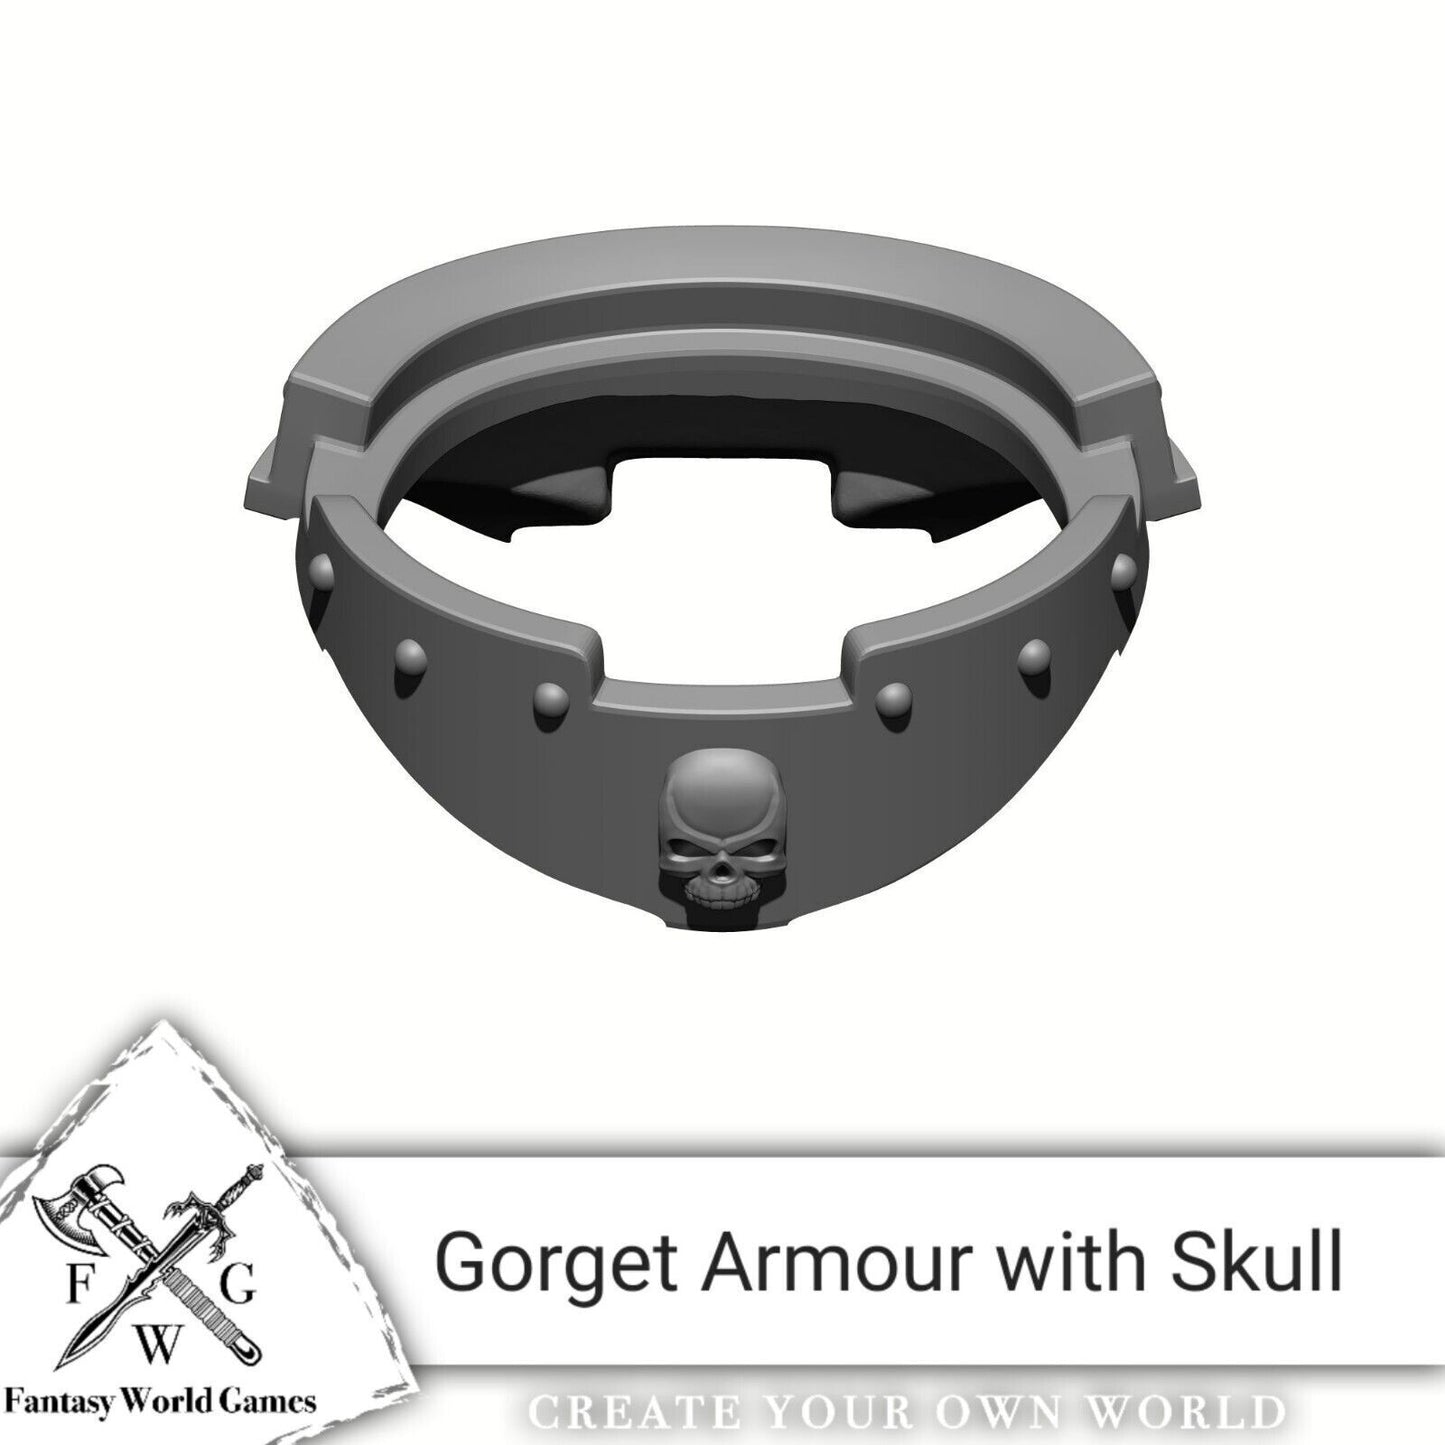 Customize your McFarlane Toys Space Mariine Shoulder Pad with the Armor - Gorget with Skull and Rivets